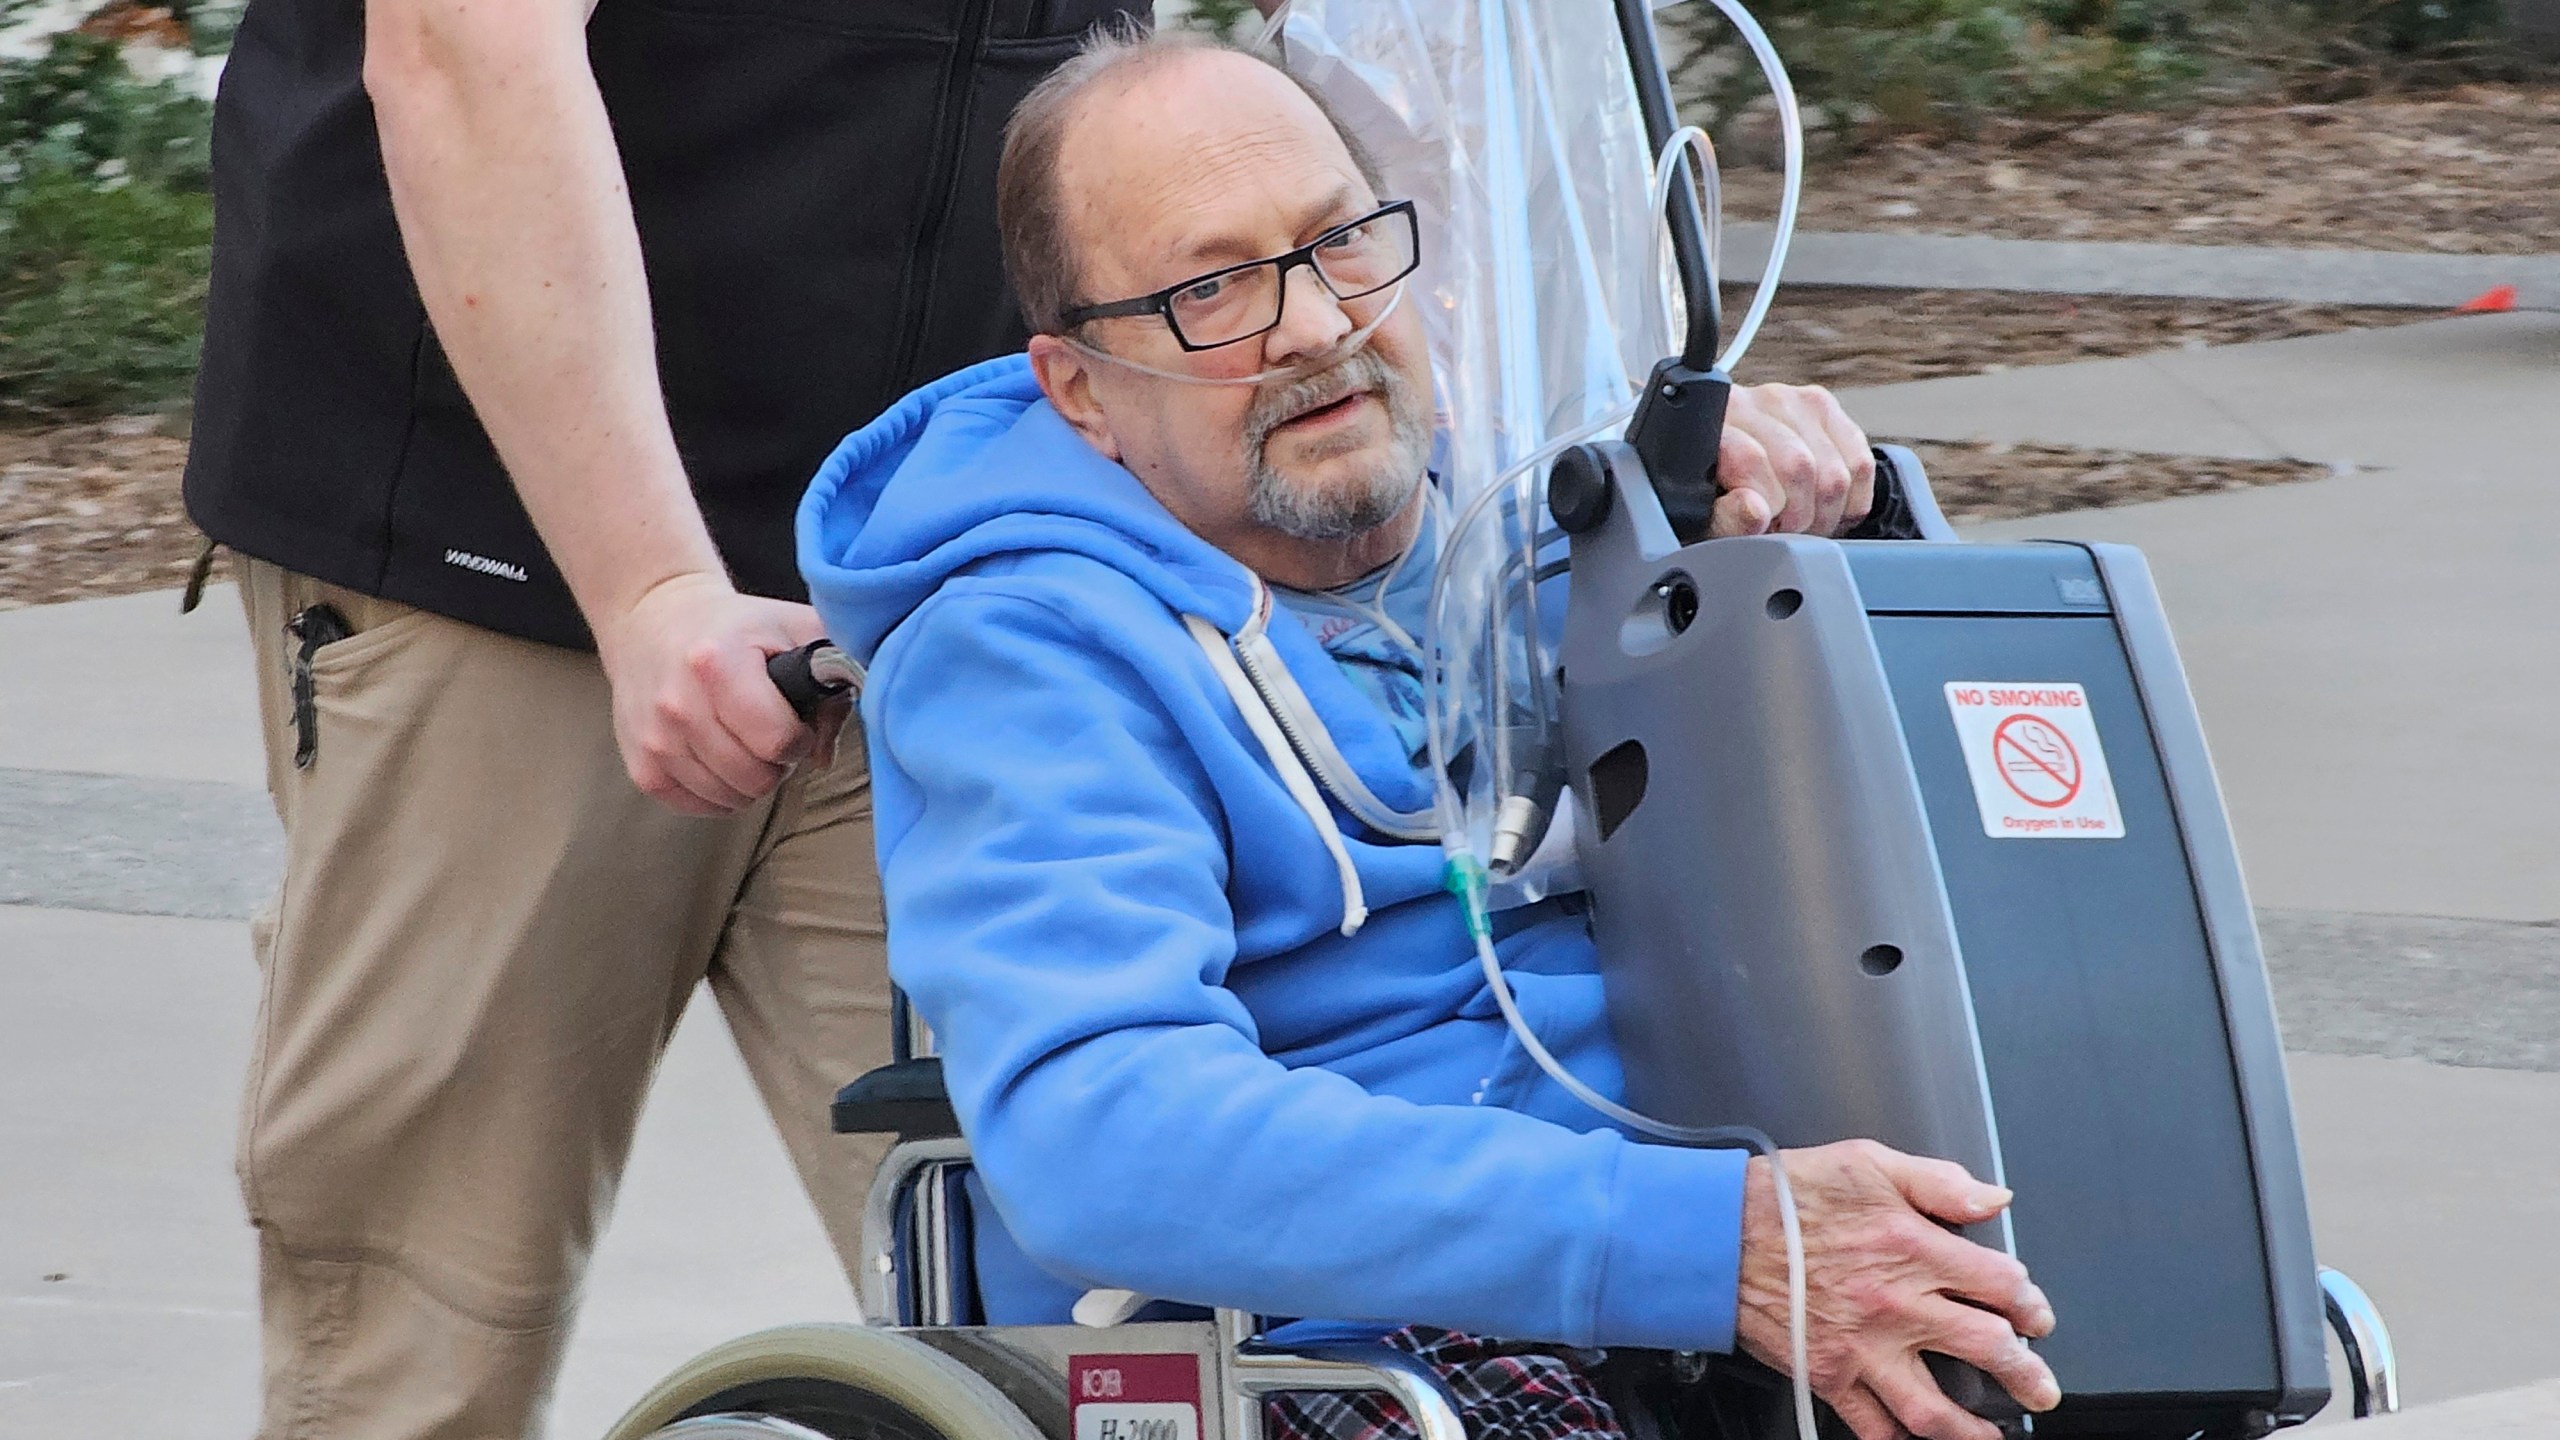 Jerry Hal Saliterman, of Crystal, Minn., is wheeled out of U.S. District Court in St. Paul, Minn., Friday, March 15, 2024, after he made his initial appearance on charges connected to the 2005 theft of a pair of ruby slippers worn by Dorothy in “The Wizard of Oz.” The FBI recovered the slippers in 2018. Another man charged in the case has already pleaded guilty and was sentenced to time served because of his ailing health. (AP Photo/Steve Karnowski)